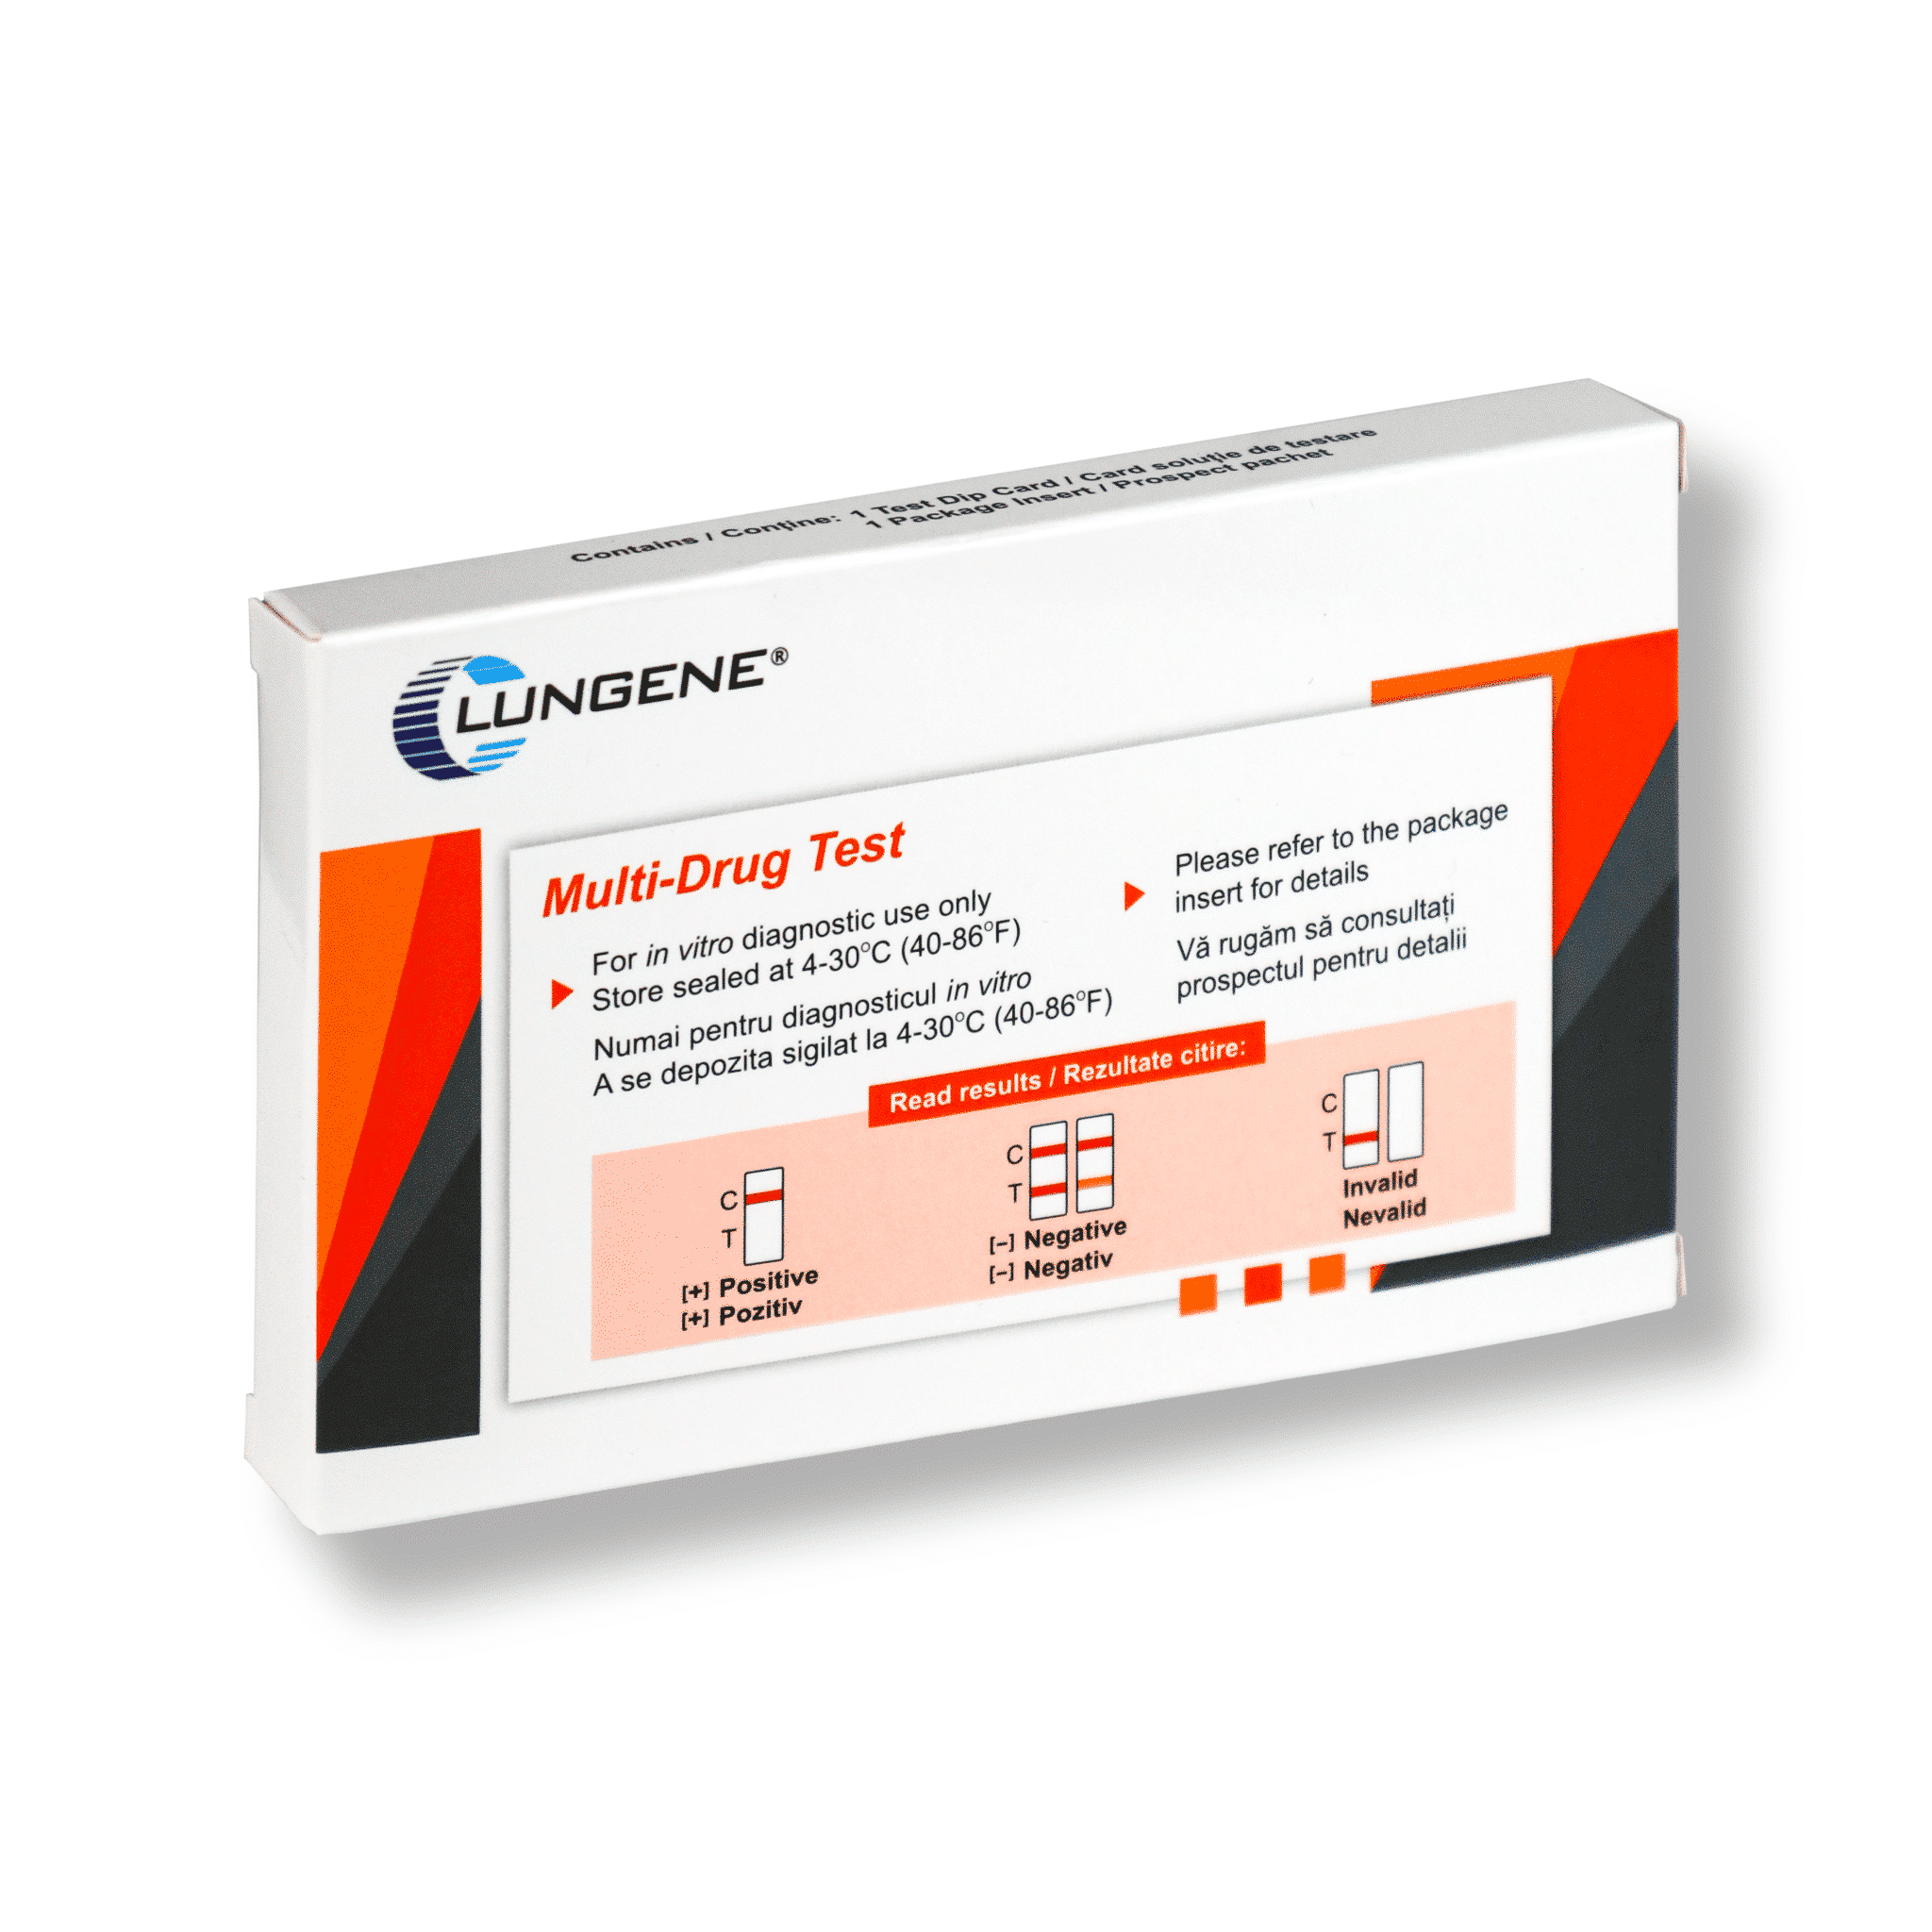 https://parahealth.de/wp-content/uploads/2023/02/Lungene-12-in-1-Drogentest-Rueckseite-3-4-s-w.png